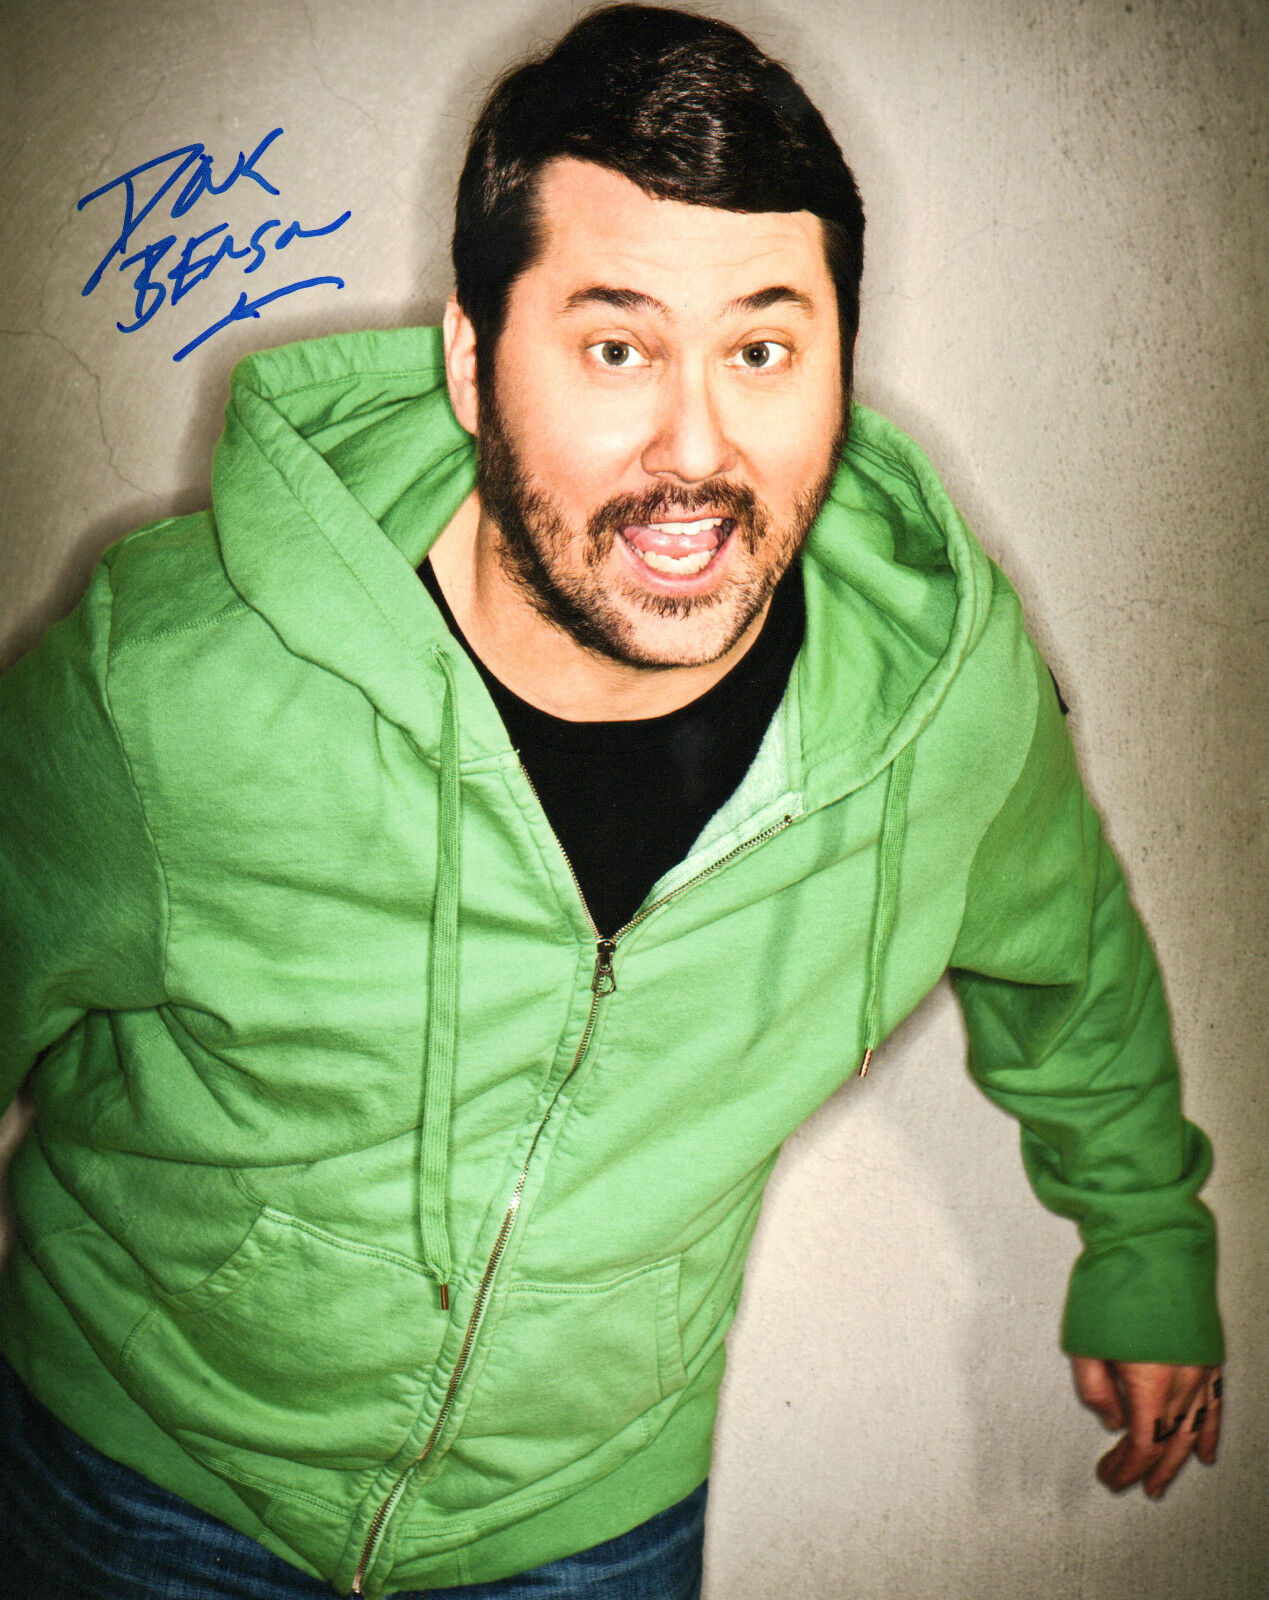 GFA Stand-Up Comedian * DOUG BENSON * Signed 8x10 Photo Poster painting AD2 COA